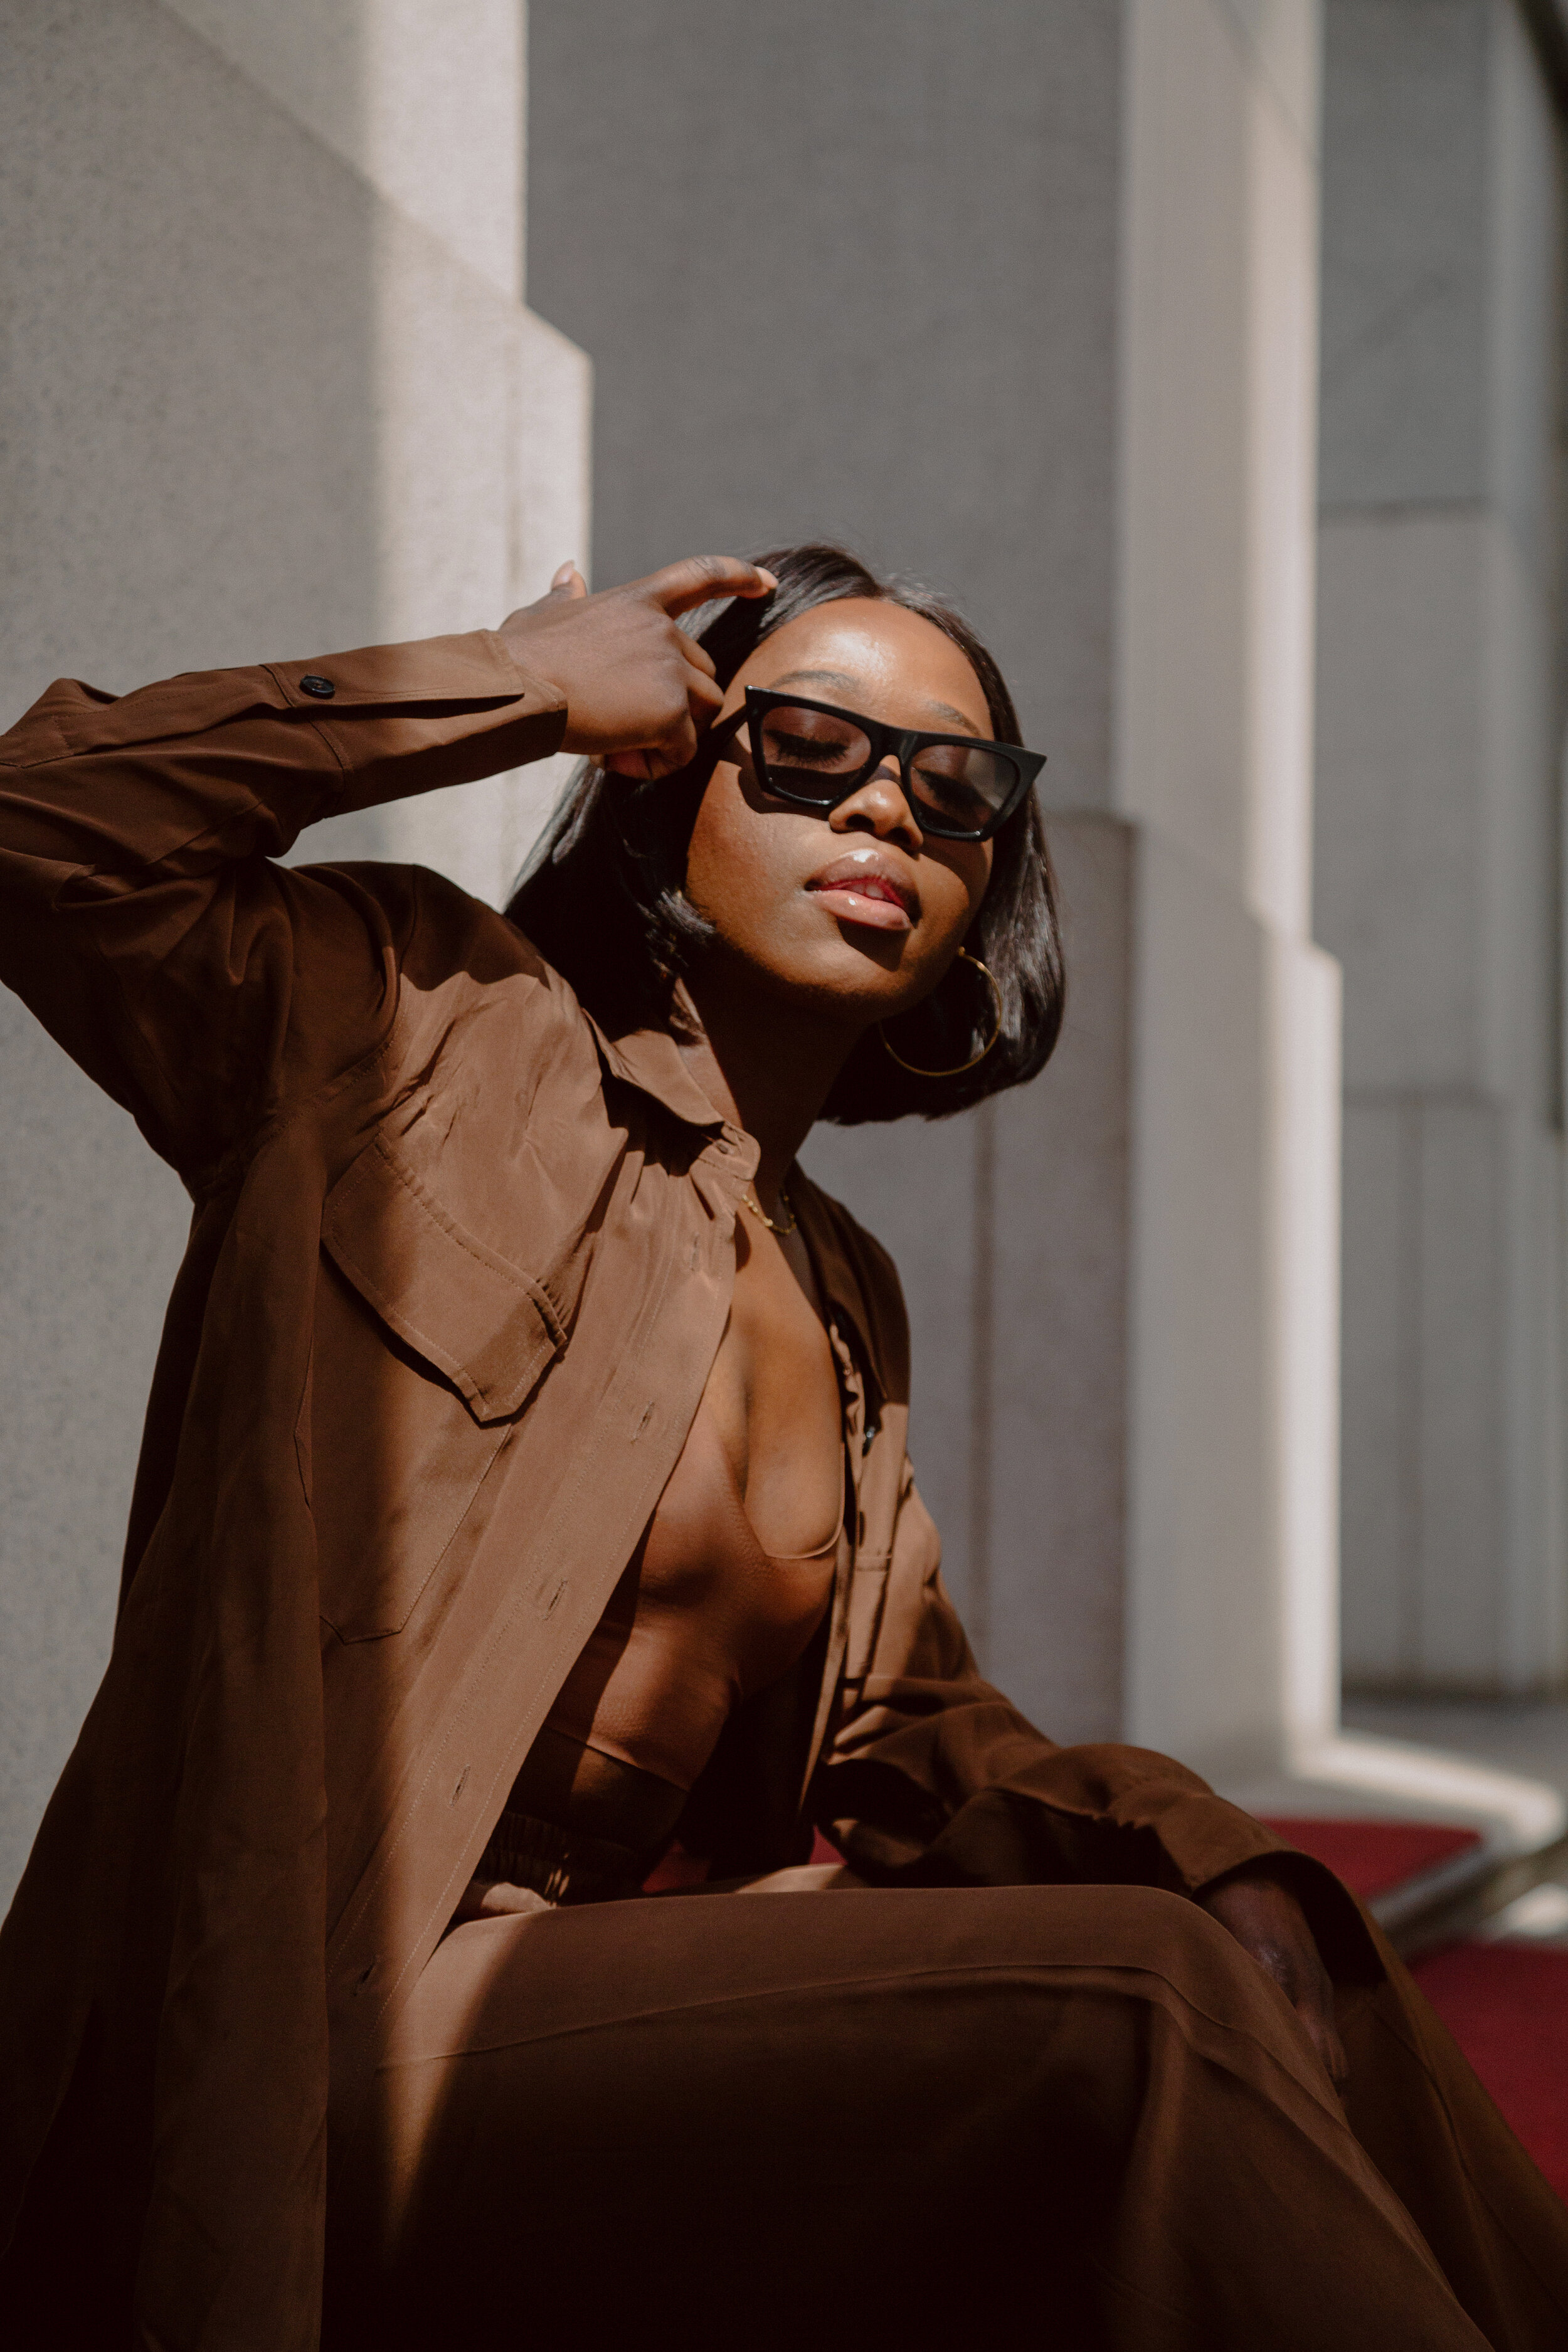 Style influencer Moyo Ayodele faces toward a patch of sunlight in a modern architectural setting